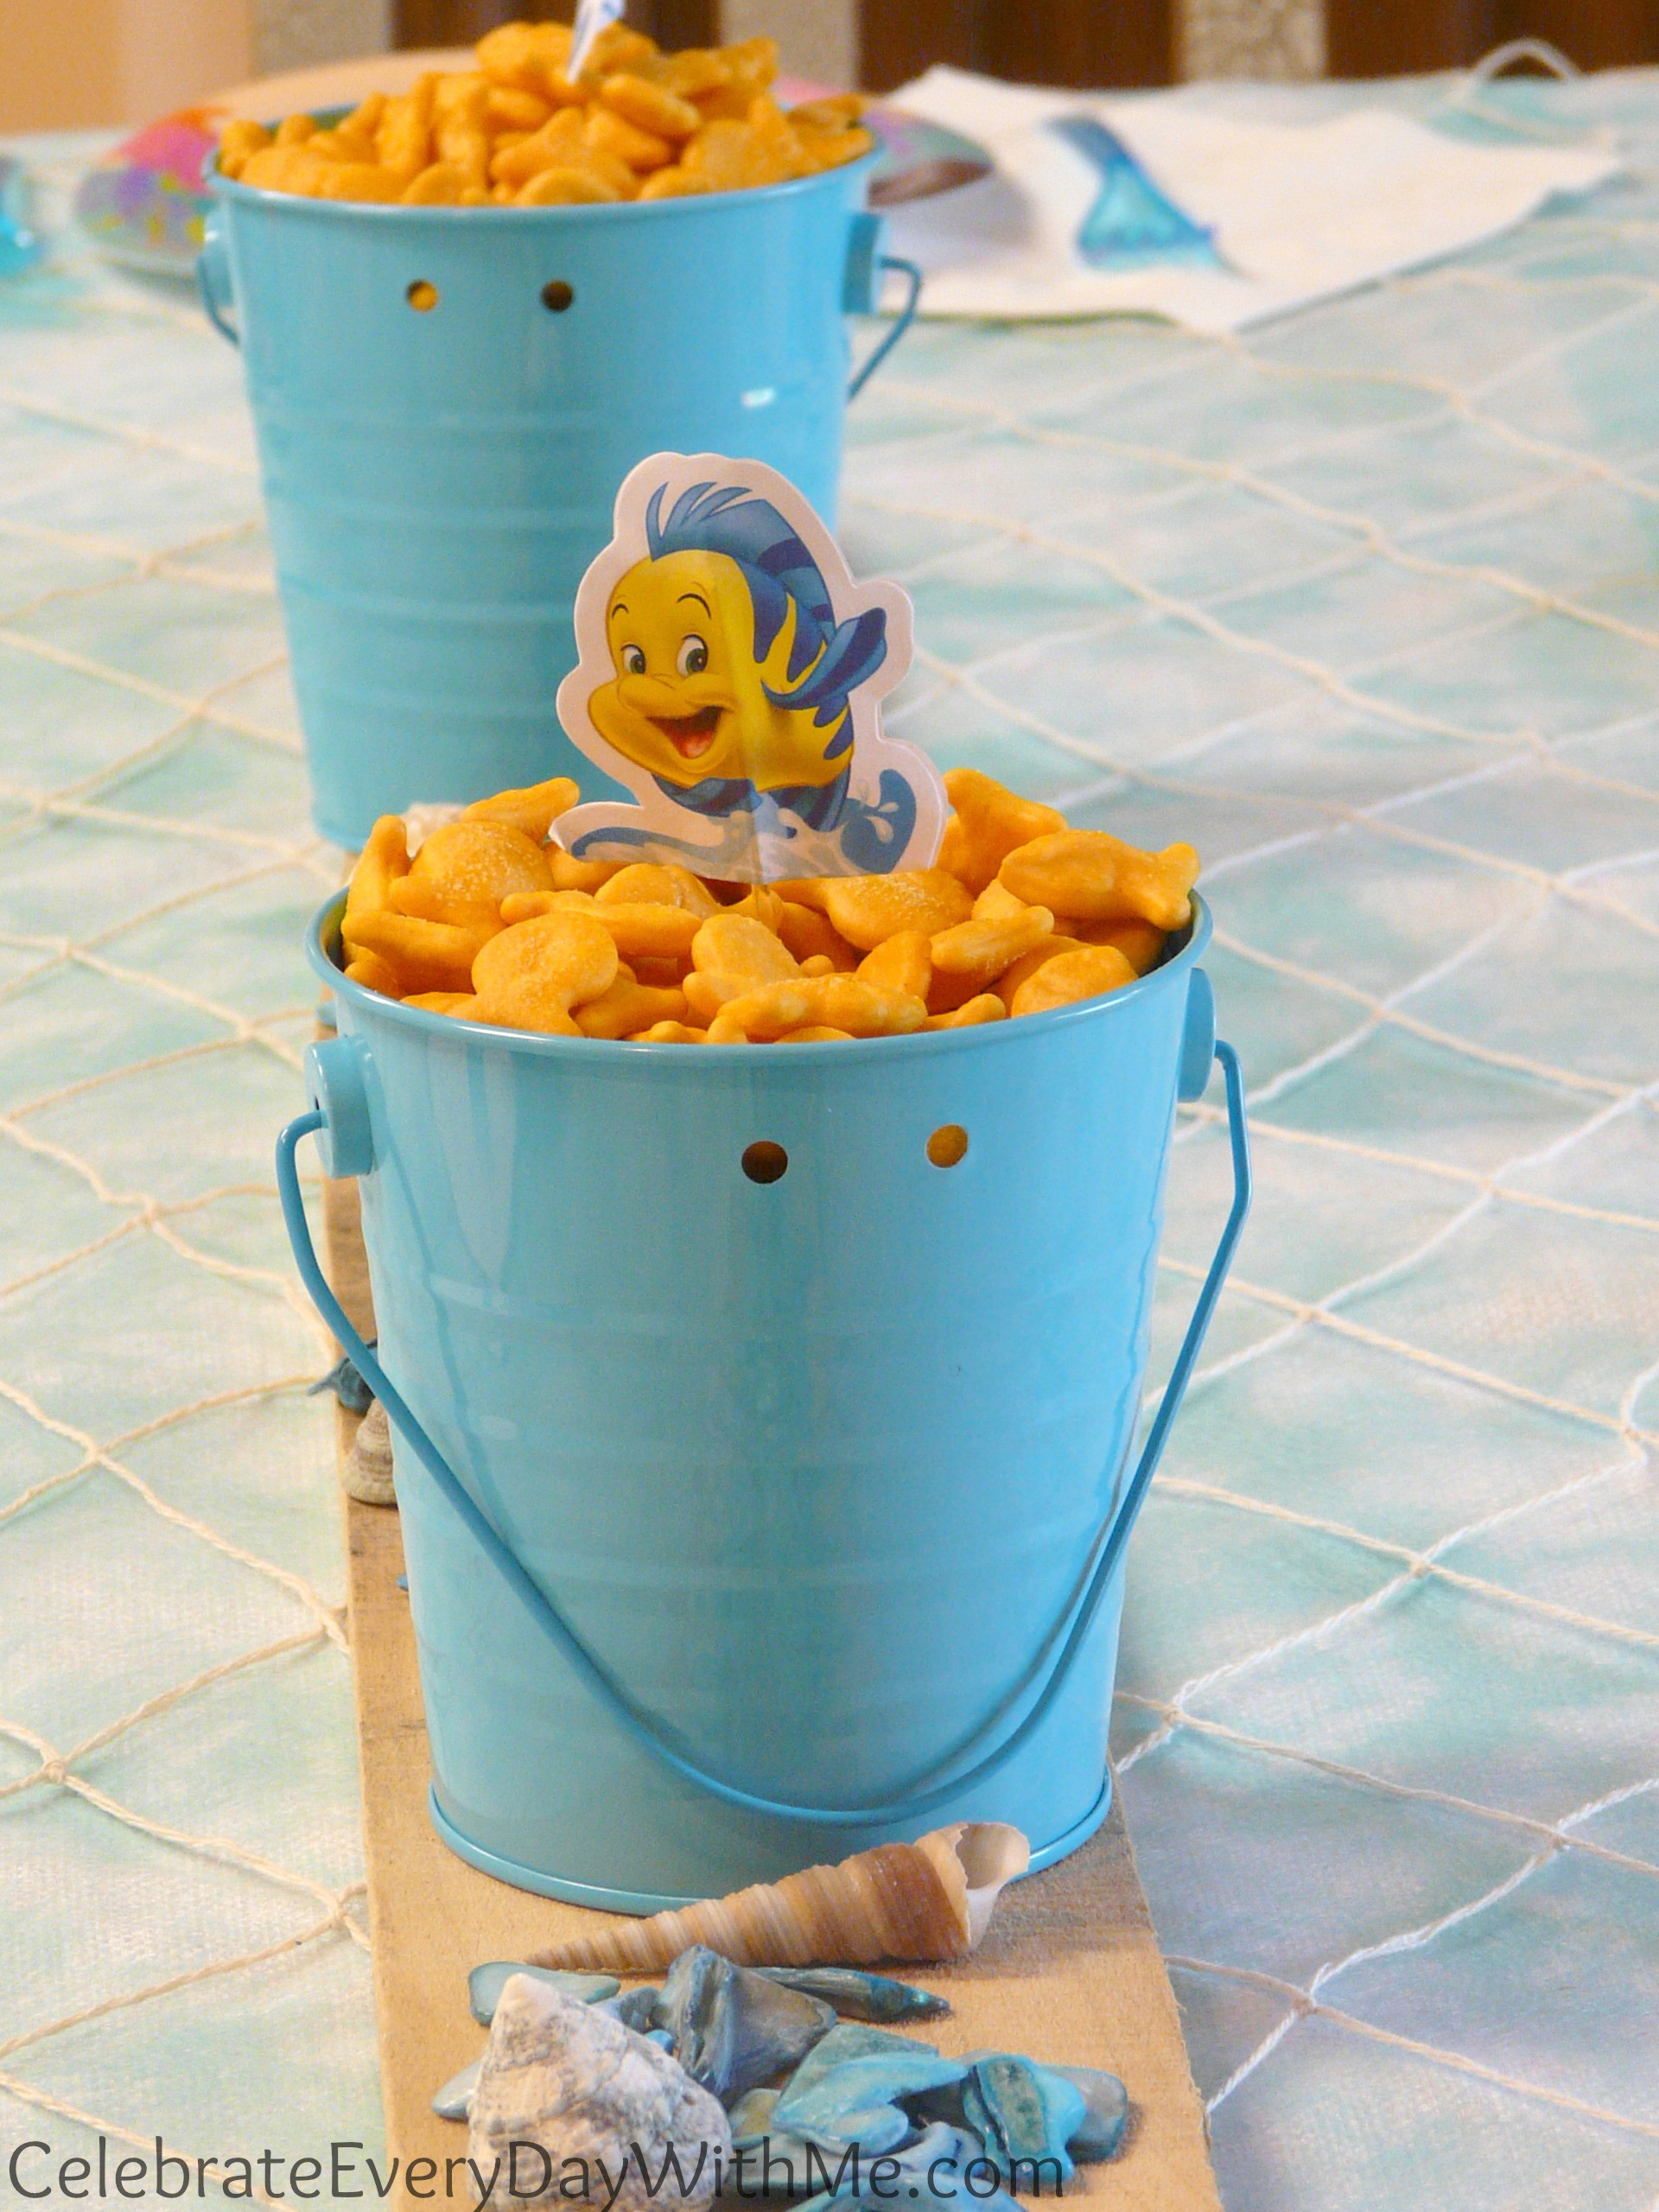 Little Mermaid Party Snack Ideas
 Little Mermaid Party Food Favors and the Rest of the Sea